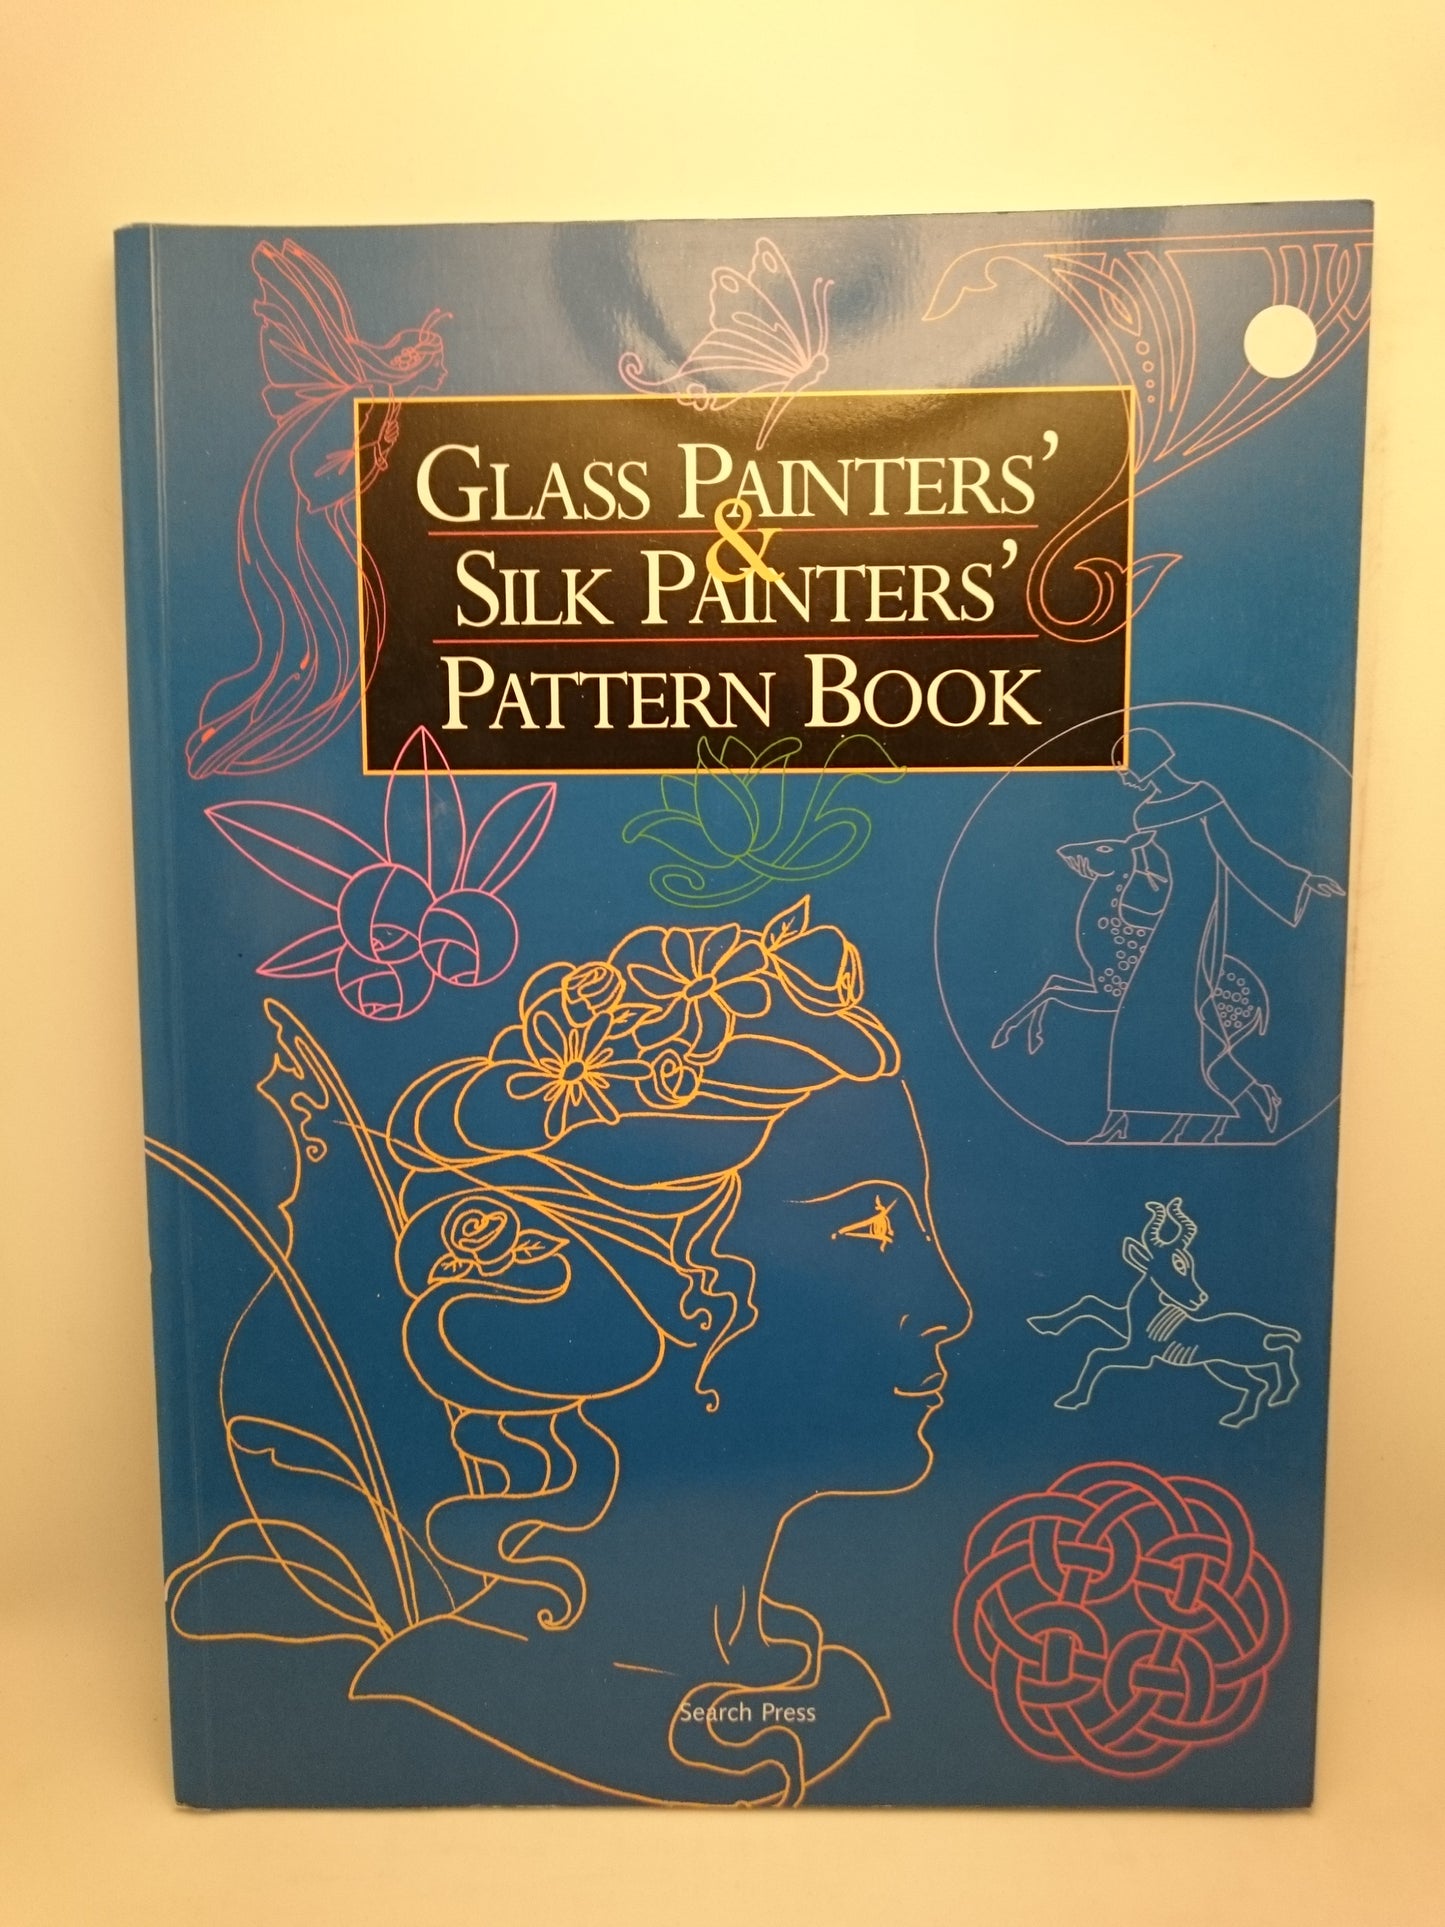 Glass Painters' and Silk Painters' Pattern Book